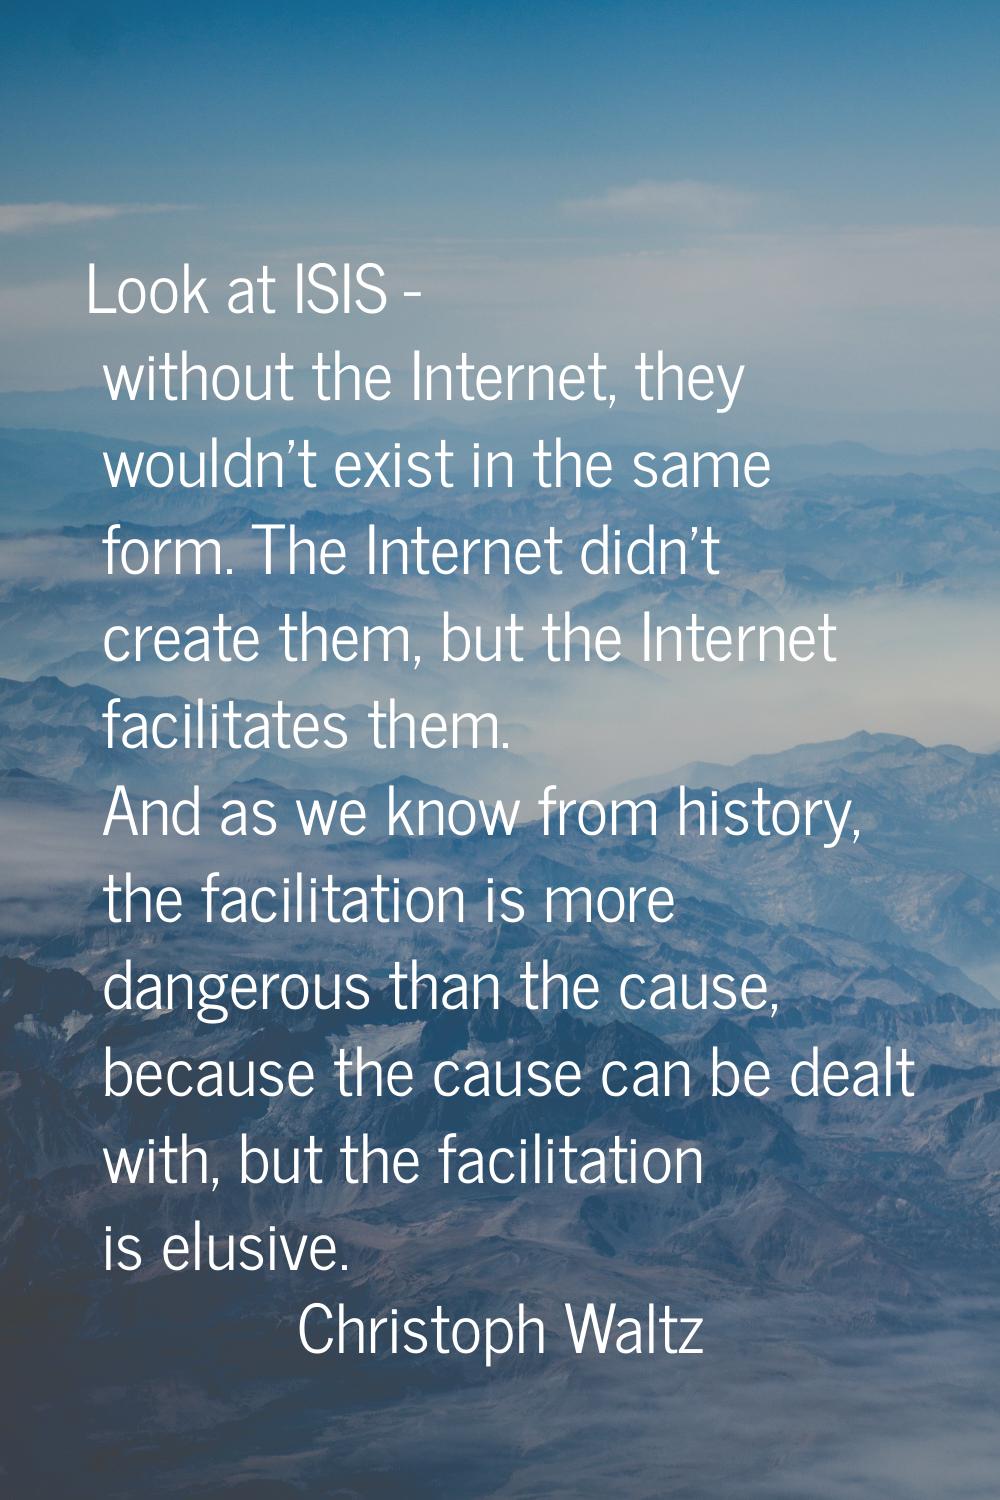 Look at ISIS - without the Internet, they wouldn't exist in the same form. The Internet didn't crea